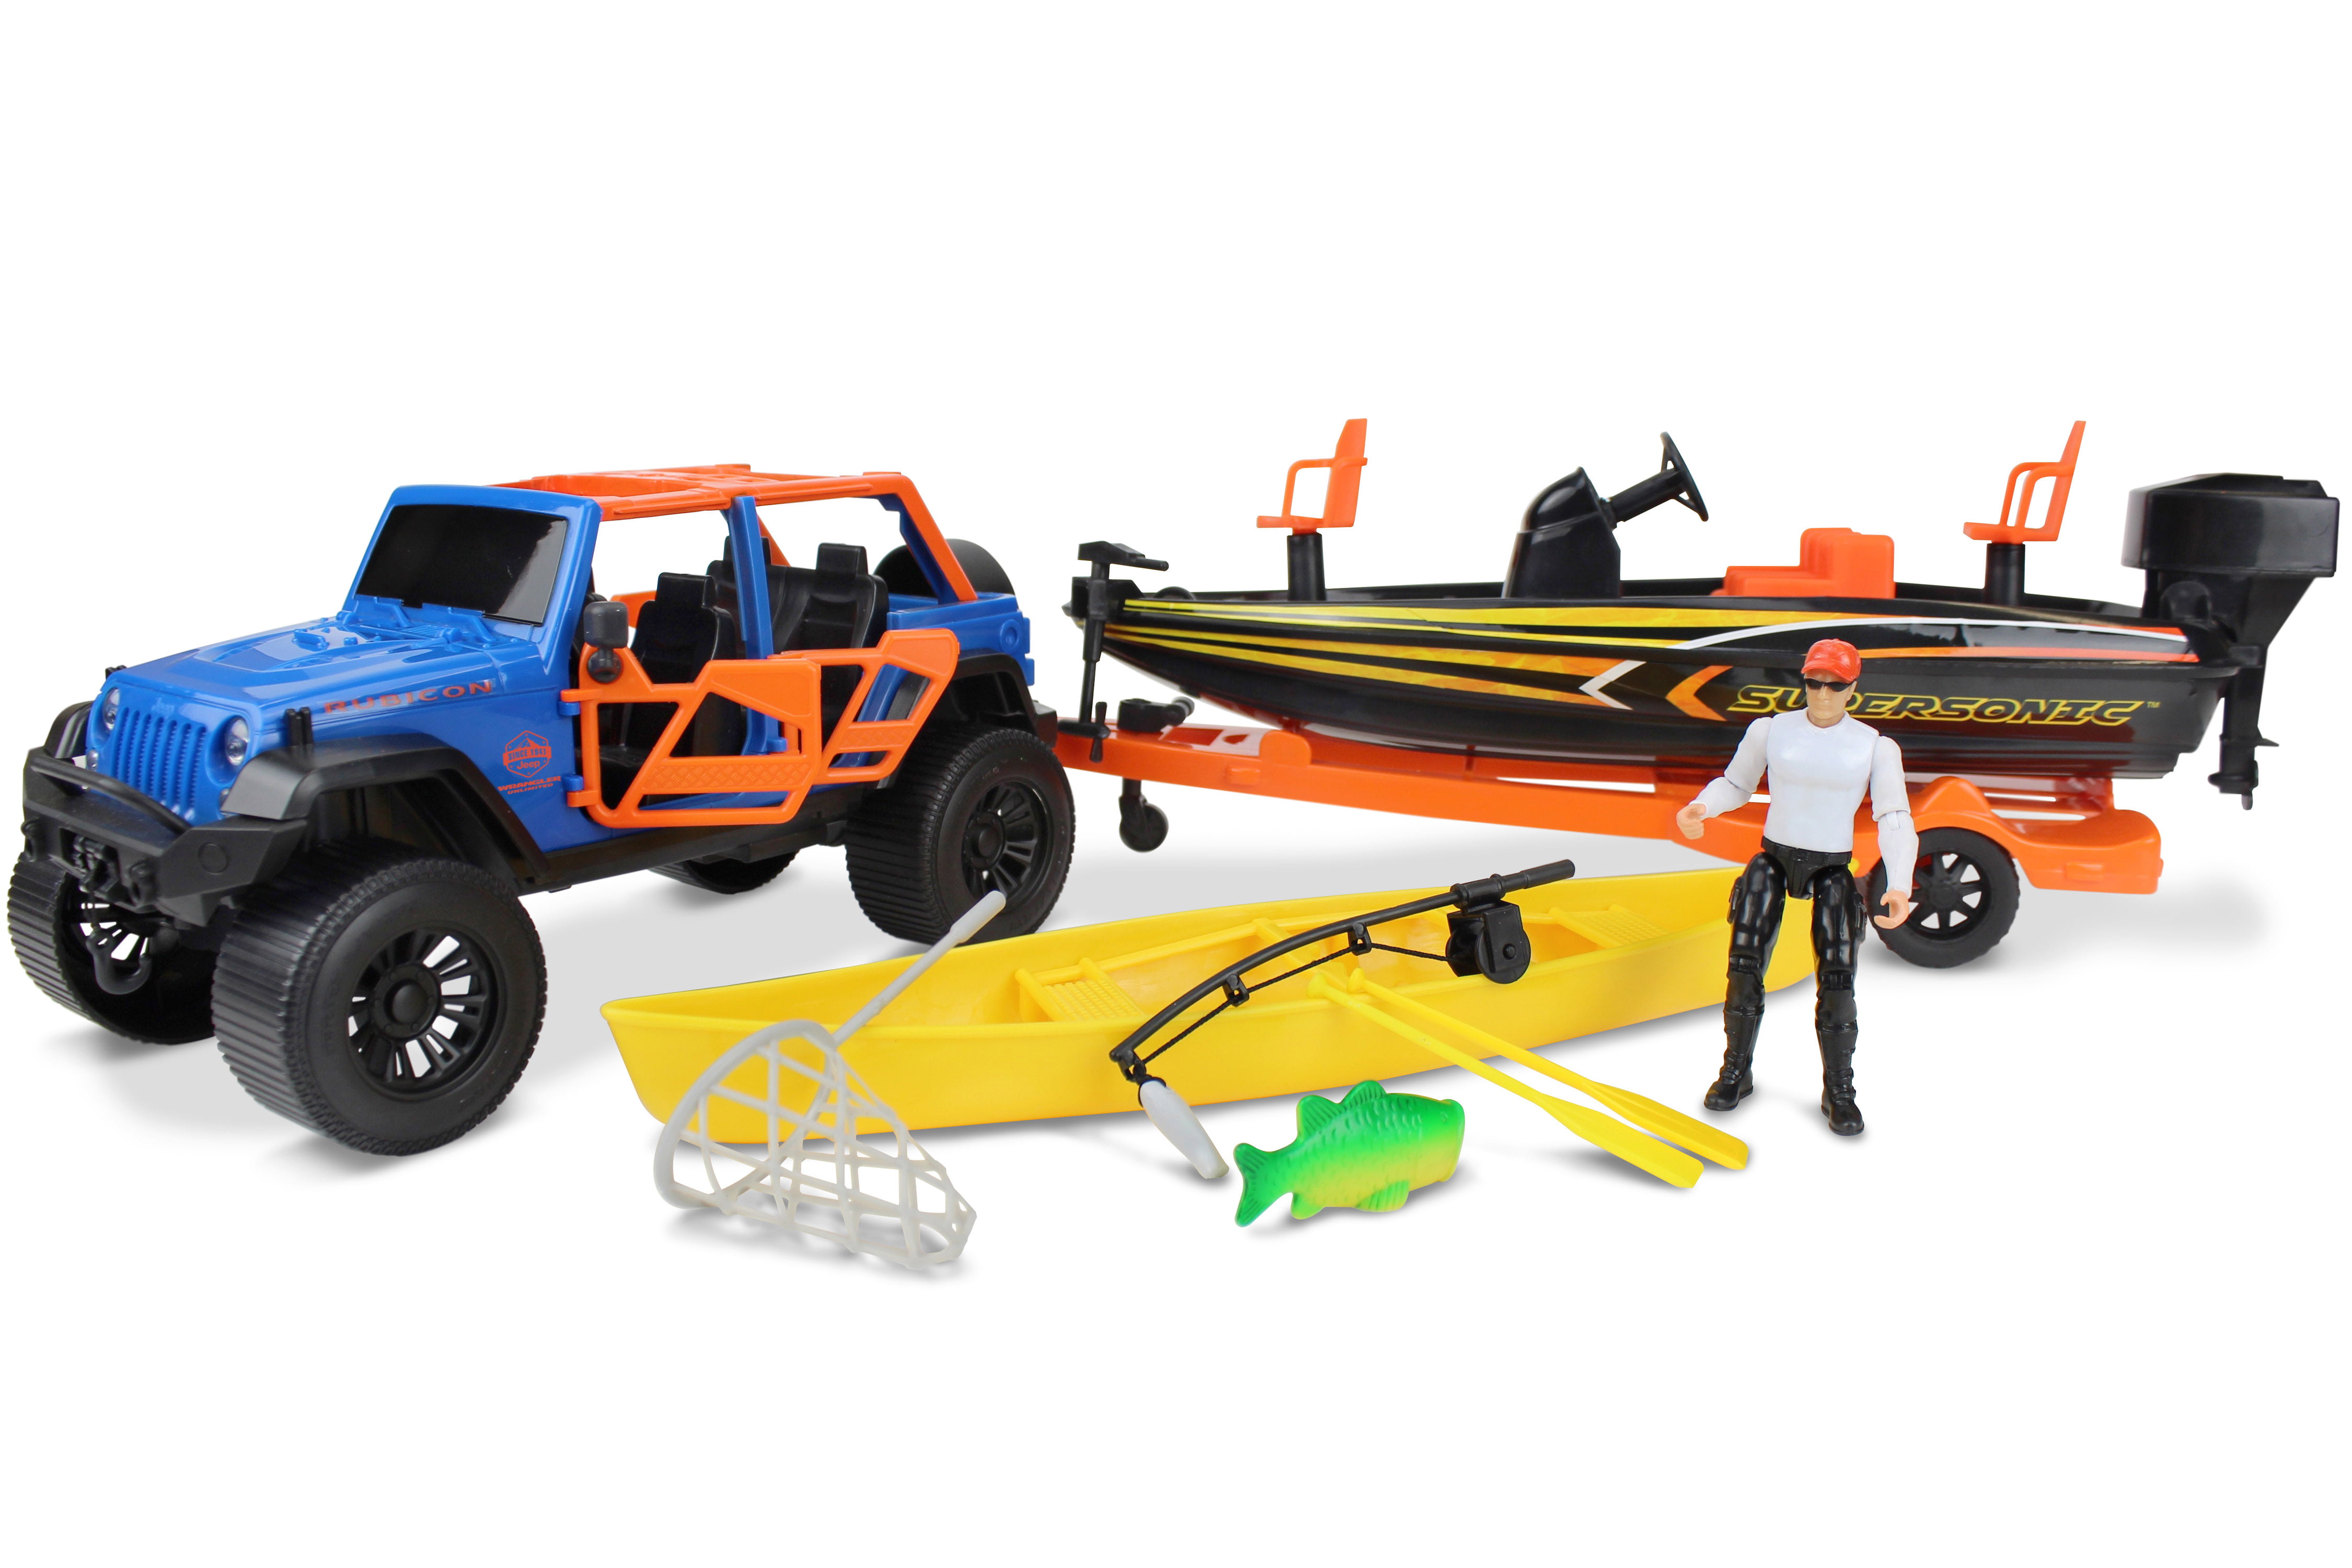 Tree House Kids Jeep Bass Boat Adventure Fish Toy